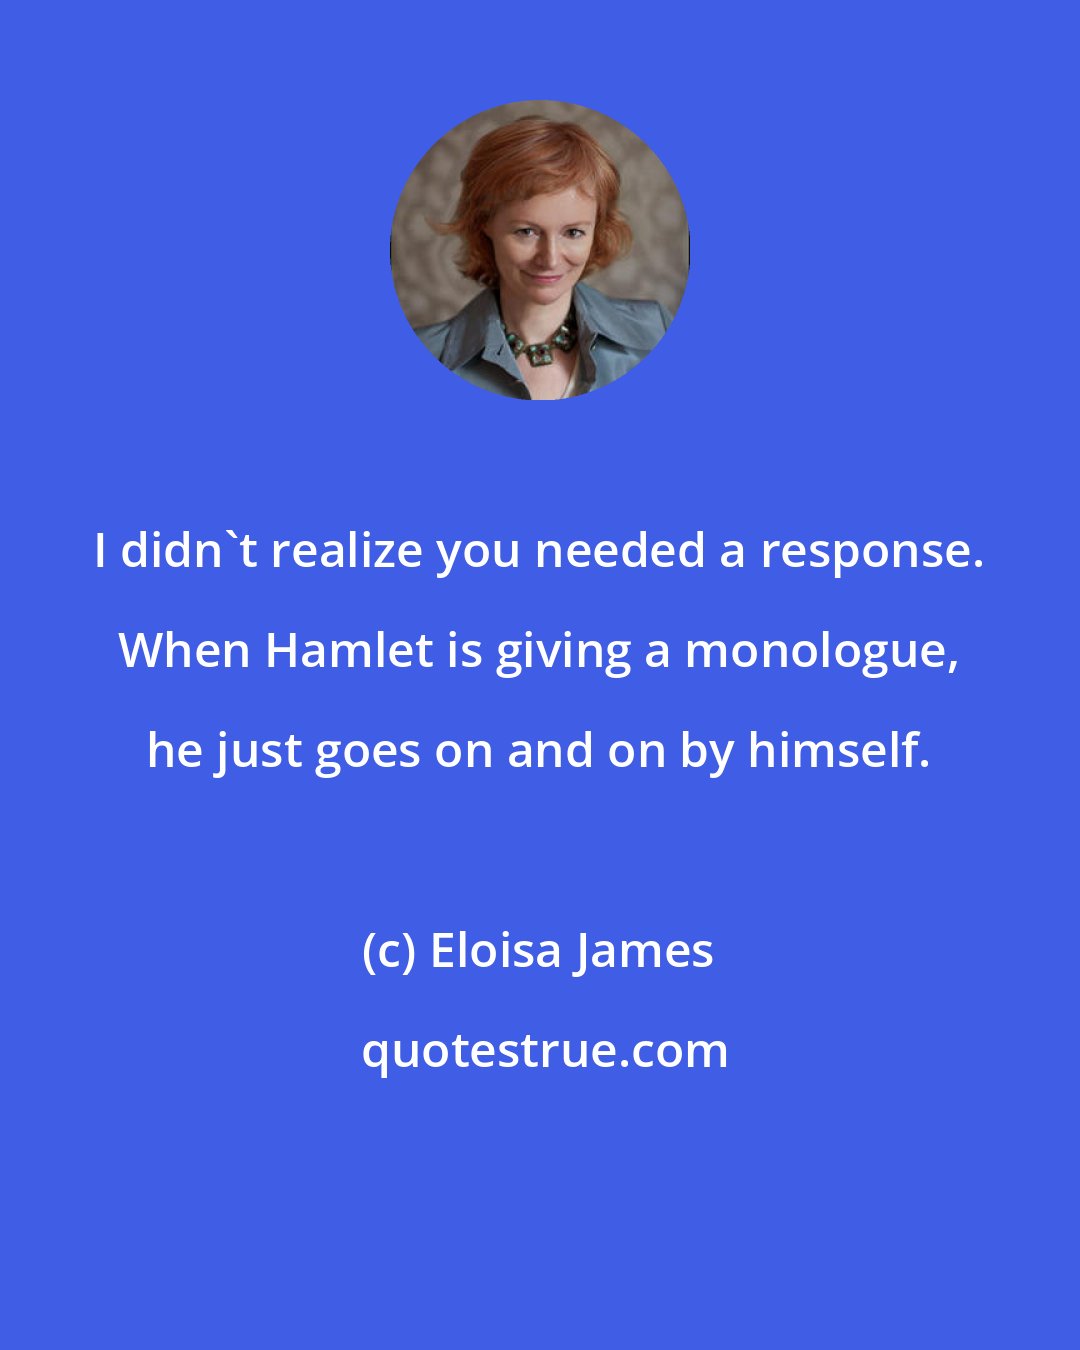 Eloisa James: I didn't realize you needed a response. When Hamlet is giving a monologue, he just goes on and on by himself.